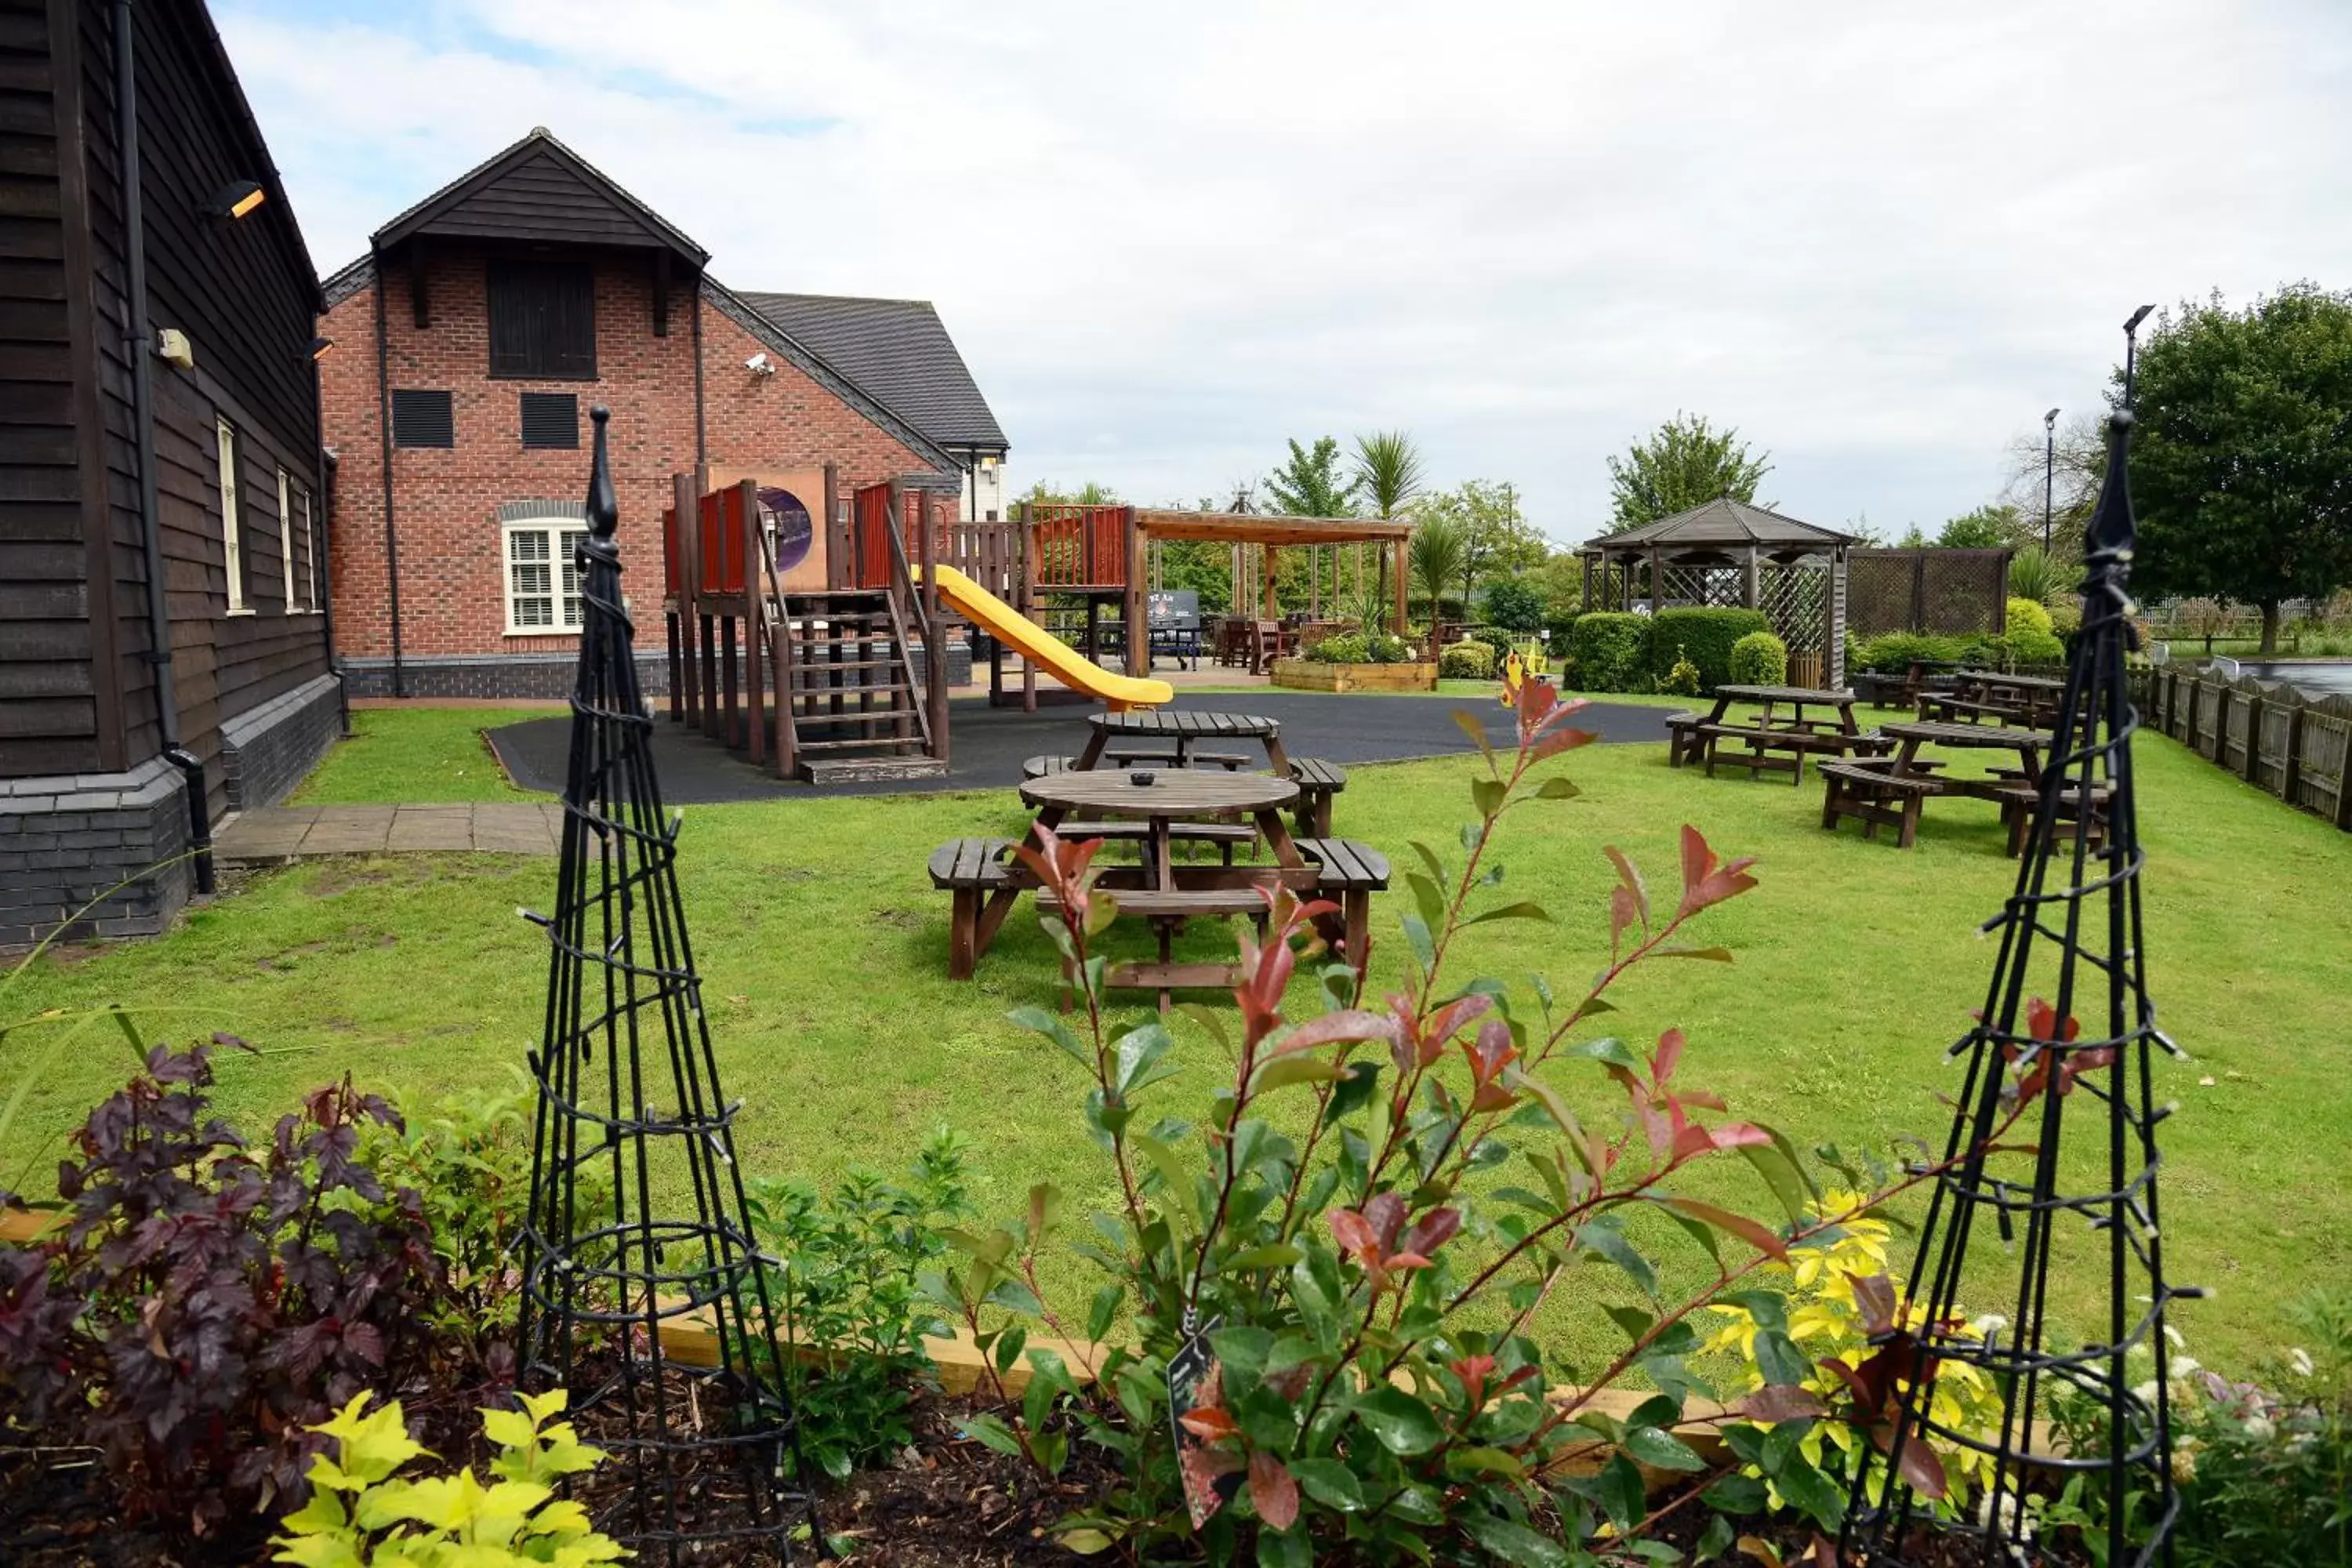 Children play ground, Property Building in Lock Keeper, Worksop by Marston's Inns